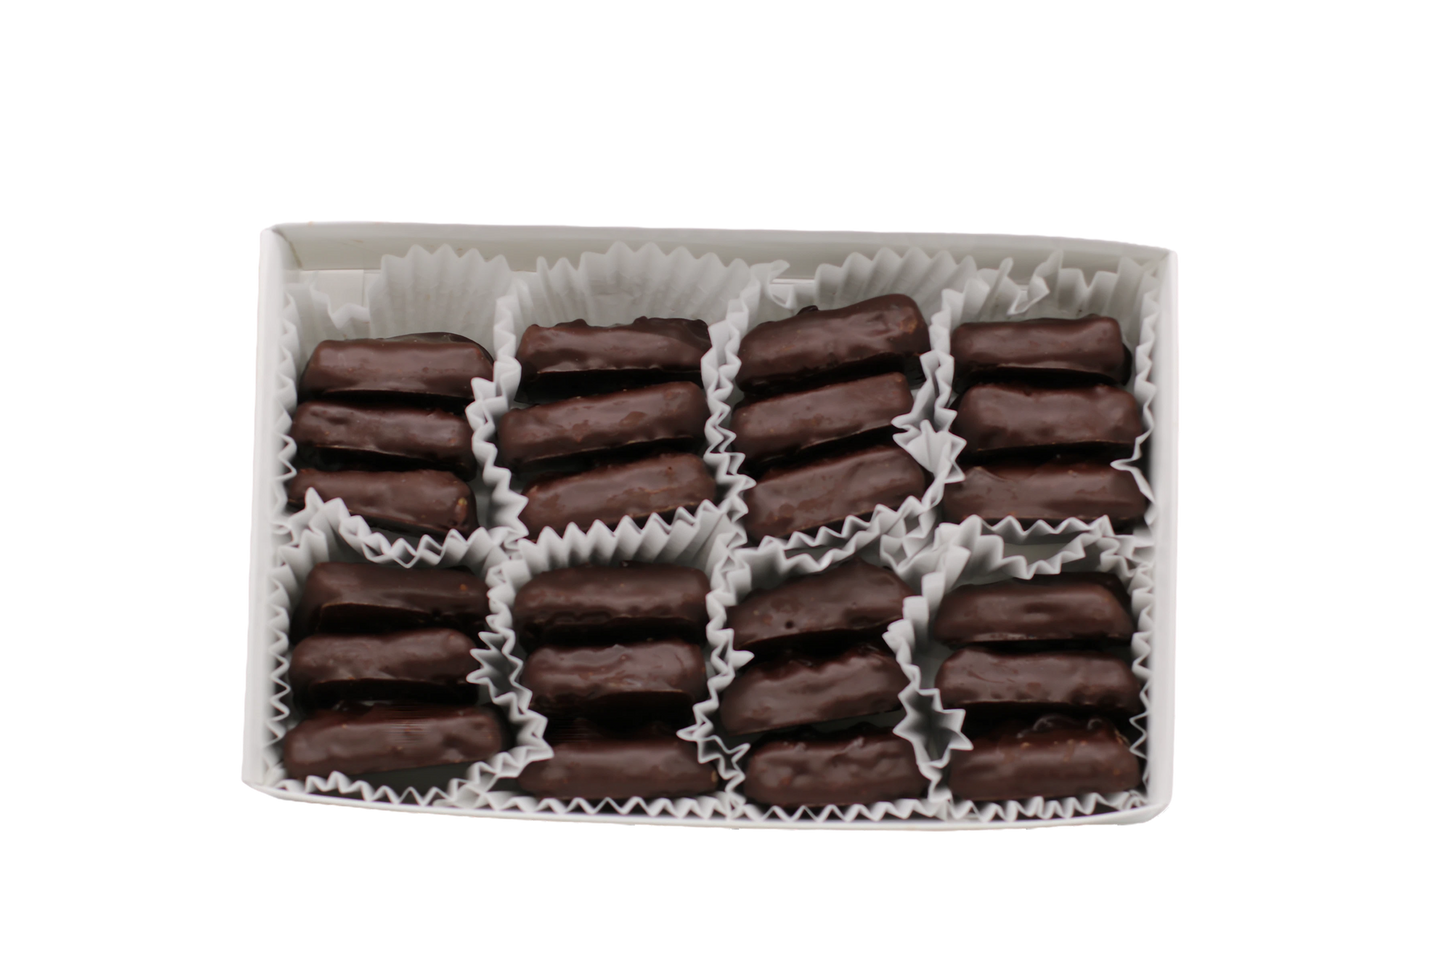 Close-up view of dark chocolate covered English toffee pieces in a 24-piece box